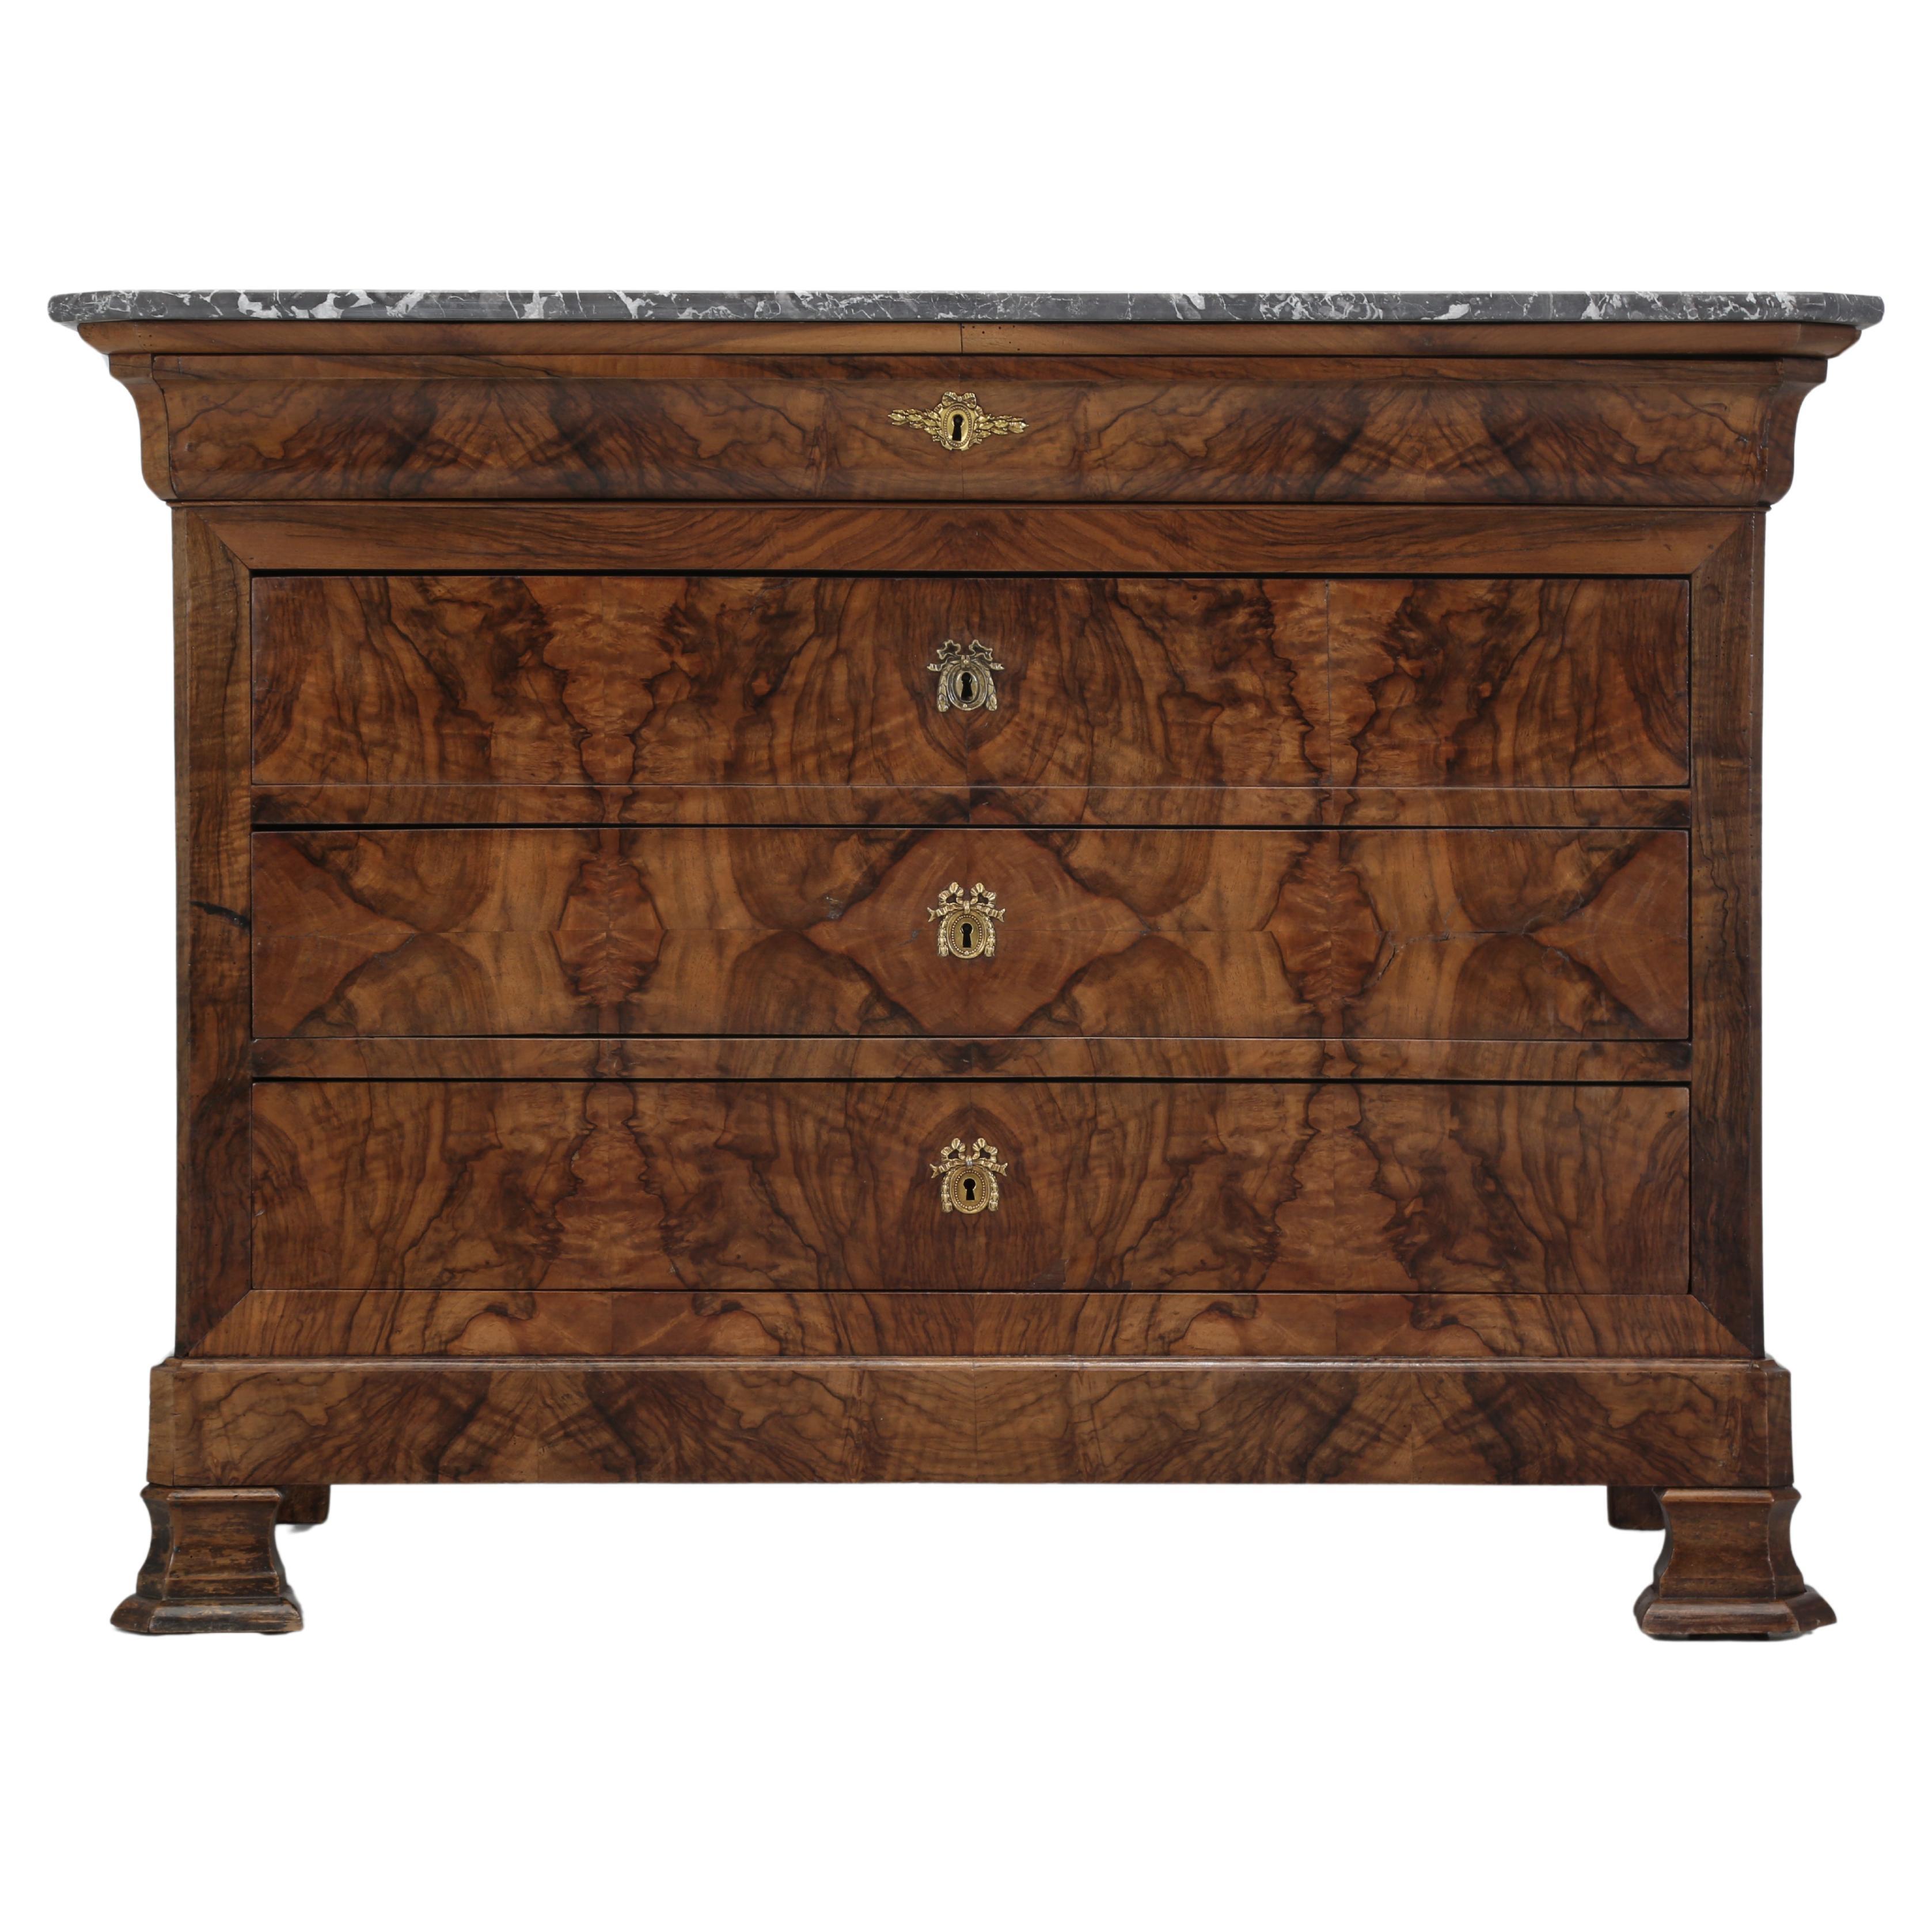 Antique French Commode Louis Philippe Style Burl Walnut Book-Matched Marble Top For Sale